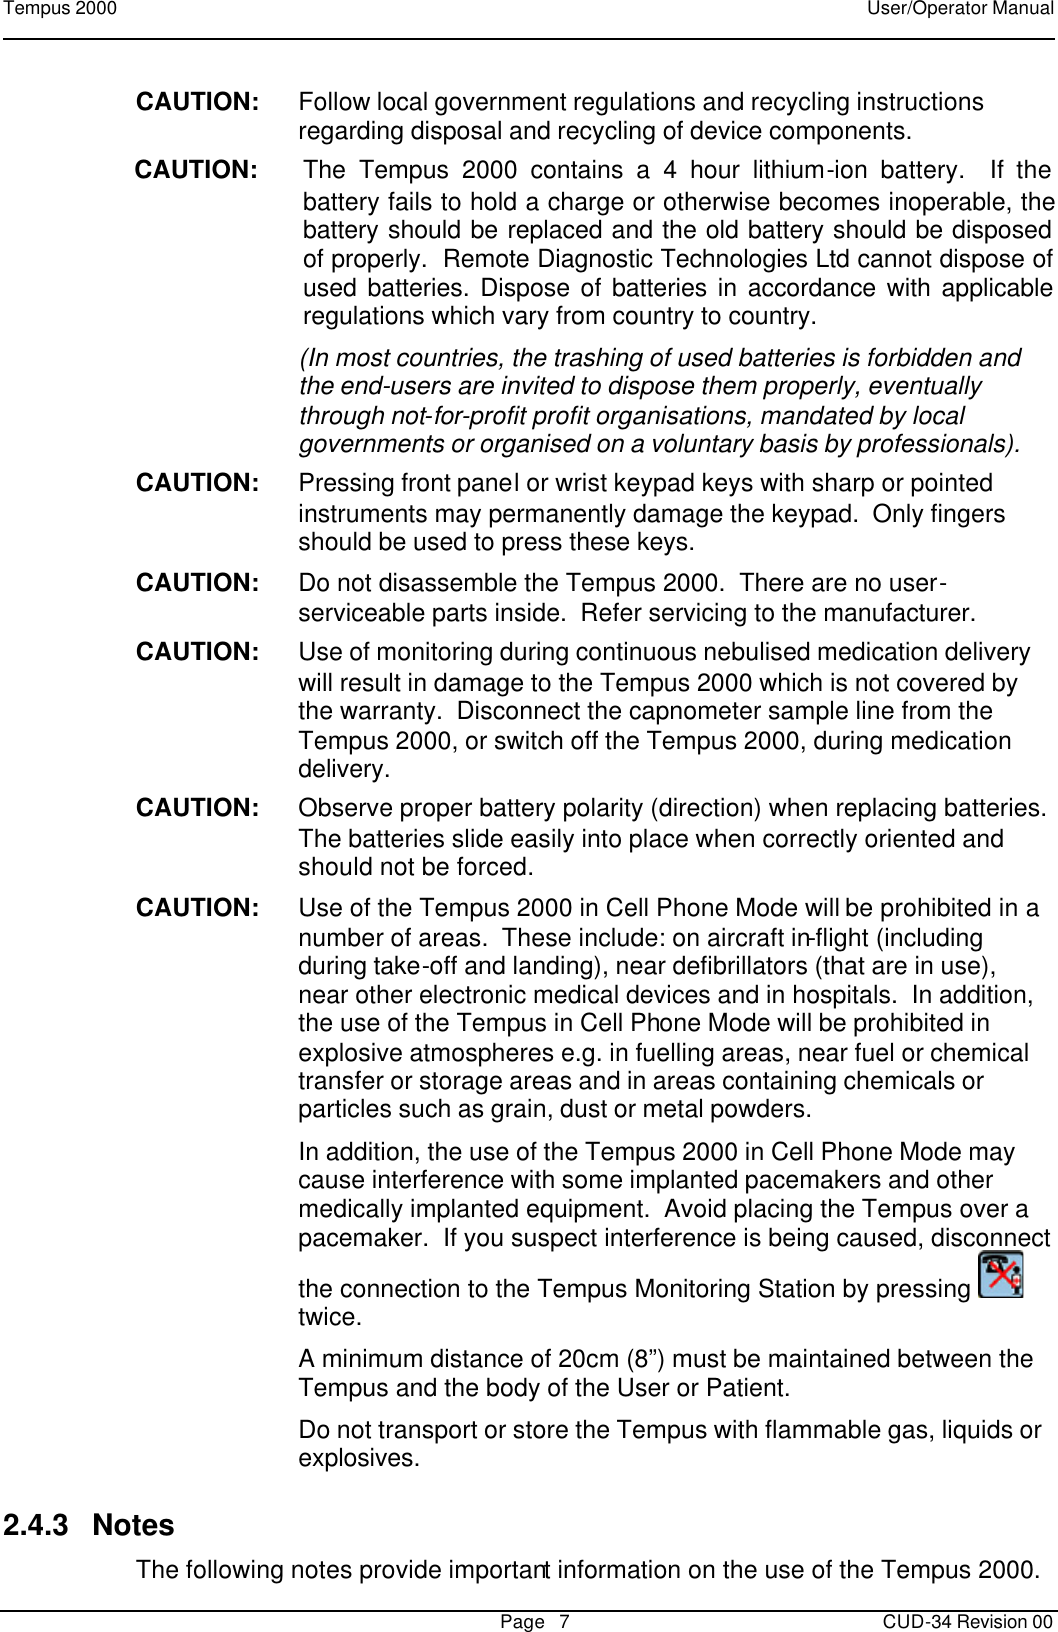 Tempus 2000    User/Operator Manual       Page   7   CUD-34 Revision 00 CAUTION: Follow local government regulations and recycling instructions regarding disposal and recycling of device components. CAUTION: The Tempus 2000 contains a 4 hour lithium-ion battery.  If the battery fails to hold a charge or otherwise becomes inoperable, the battery should be replaced and the old battery should be disposed of properly.  Remote Diagnostic Technologies Ltd cannot dispose of used batteries. Dispose of batteries in accordance with applicable regulations which vary from country to country.  (In most countries, the trashing of used batteries is forbidden and the end-users are invited to dispose them properly, eventually through not-for-profit profit organisations, mandated by local governments or organised on a voluntary basis by professionals). CAUTION: Pressing front panel or wrist keypad keys with sharp or pointed instruments may permanently damage the keypad.  Only fingers should be used to press these keys. CAUTION: Do not disassemble the Tempus 2000.  There are no user-serviceable parts inside.  Refer servicing to the manufacturer. CAUTION: Use of monitoring during continuous nebulised medication delivery will result in damage to the Tempus 2000 which is not covered by the warranty.  Disconnect the capnometer sample line from the Tempus 2000, or switch off the Tempus 2000, during medication delivery. CAUTION: Observe proper battery polarity (direction) when replacing batteries.  The batteries slide easily into place when correctly oriented and should not be forced. CAUTION: Use of the Tempus 2000 in Cell Phone Mode will be prohibited in a number of areas.  These include: on aircraft in-flight (including during take-off and landing), near defibrillators (that are in use), near other electronic medical devices and in hospitals.  In addition, the use of the Tempus in Cell Phone Mode will be prohibited in explosive atmospheres e.g. in fuelling areas, near fuel or chemical transfer or storage areas and in areas containing chemicals or particles such as grain, dust or metal powders.  In addition, the use of the Tempus 2000 in Cell Phone Mode may cause interference with some implanted pacemakers and other medically implanted equipment.  Avoid placing the Tempus over a pacemaker.  If you suspect interference is being caused, disconnect the connection to the Tempus Monitoring Station by pressing   twice.  A minimum distance of 20cm (8”) must be maintained between the Tempus and the body of the User or Patient.    Do not transport or store the Tempus with flammable gas, liquids or explosives. 2.4.3 Notes The following notes provide important information on the use of the Tempus 2000.   